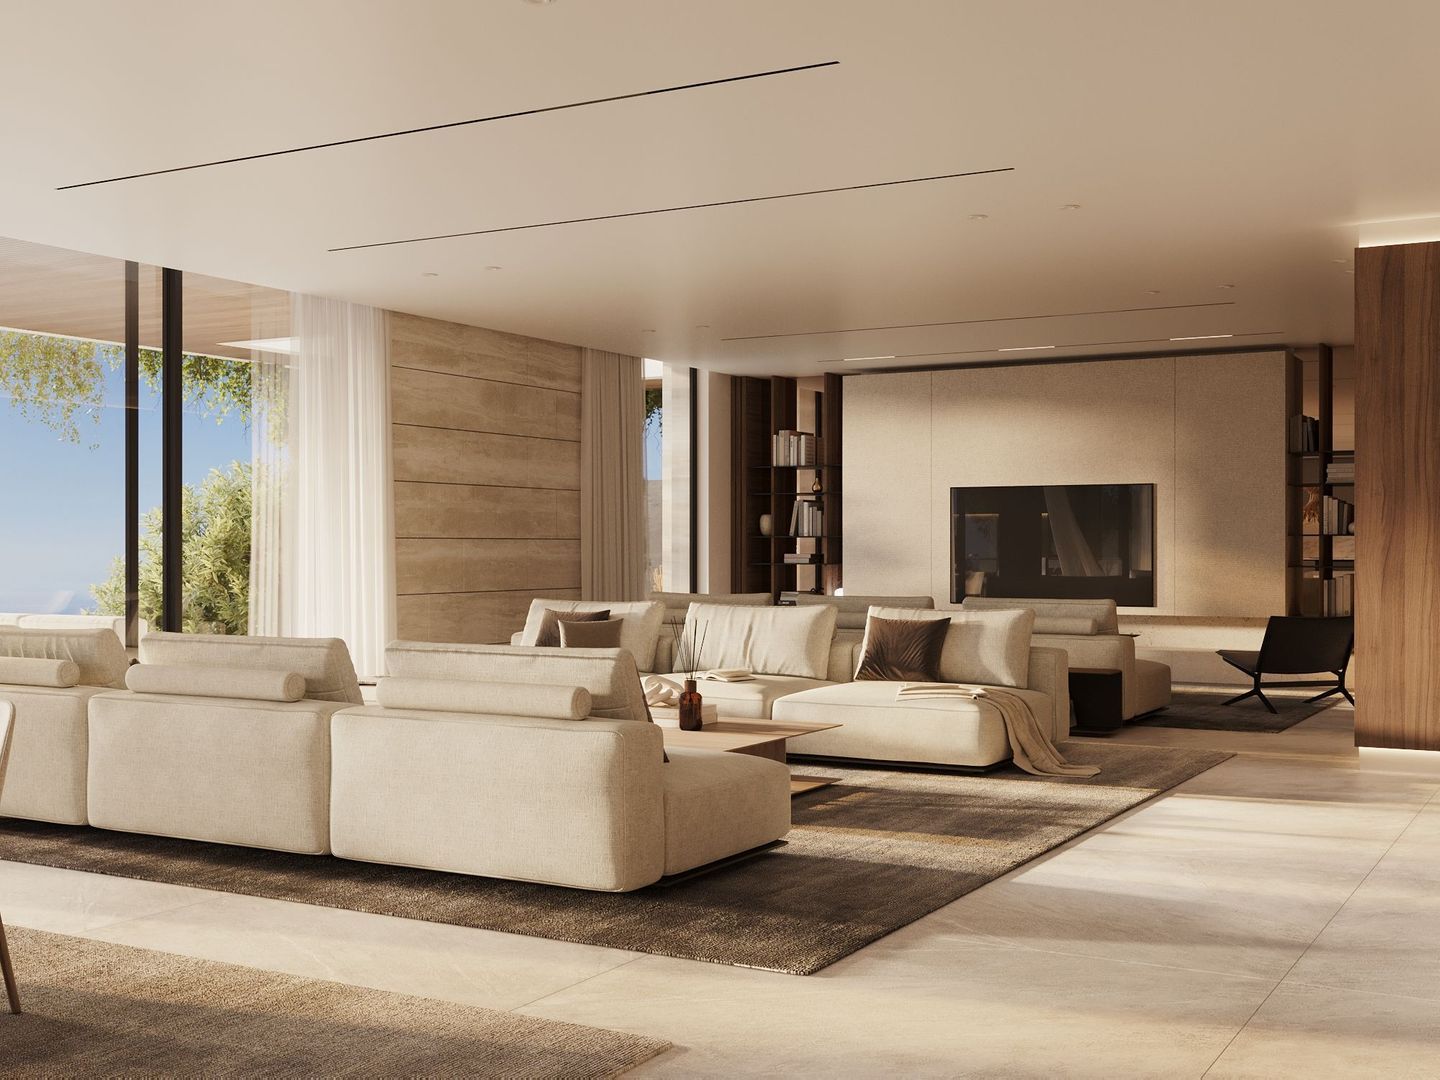 One of the most exciting property launches in Marbella, Benahavis foto-3